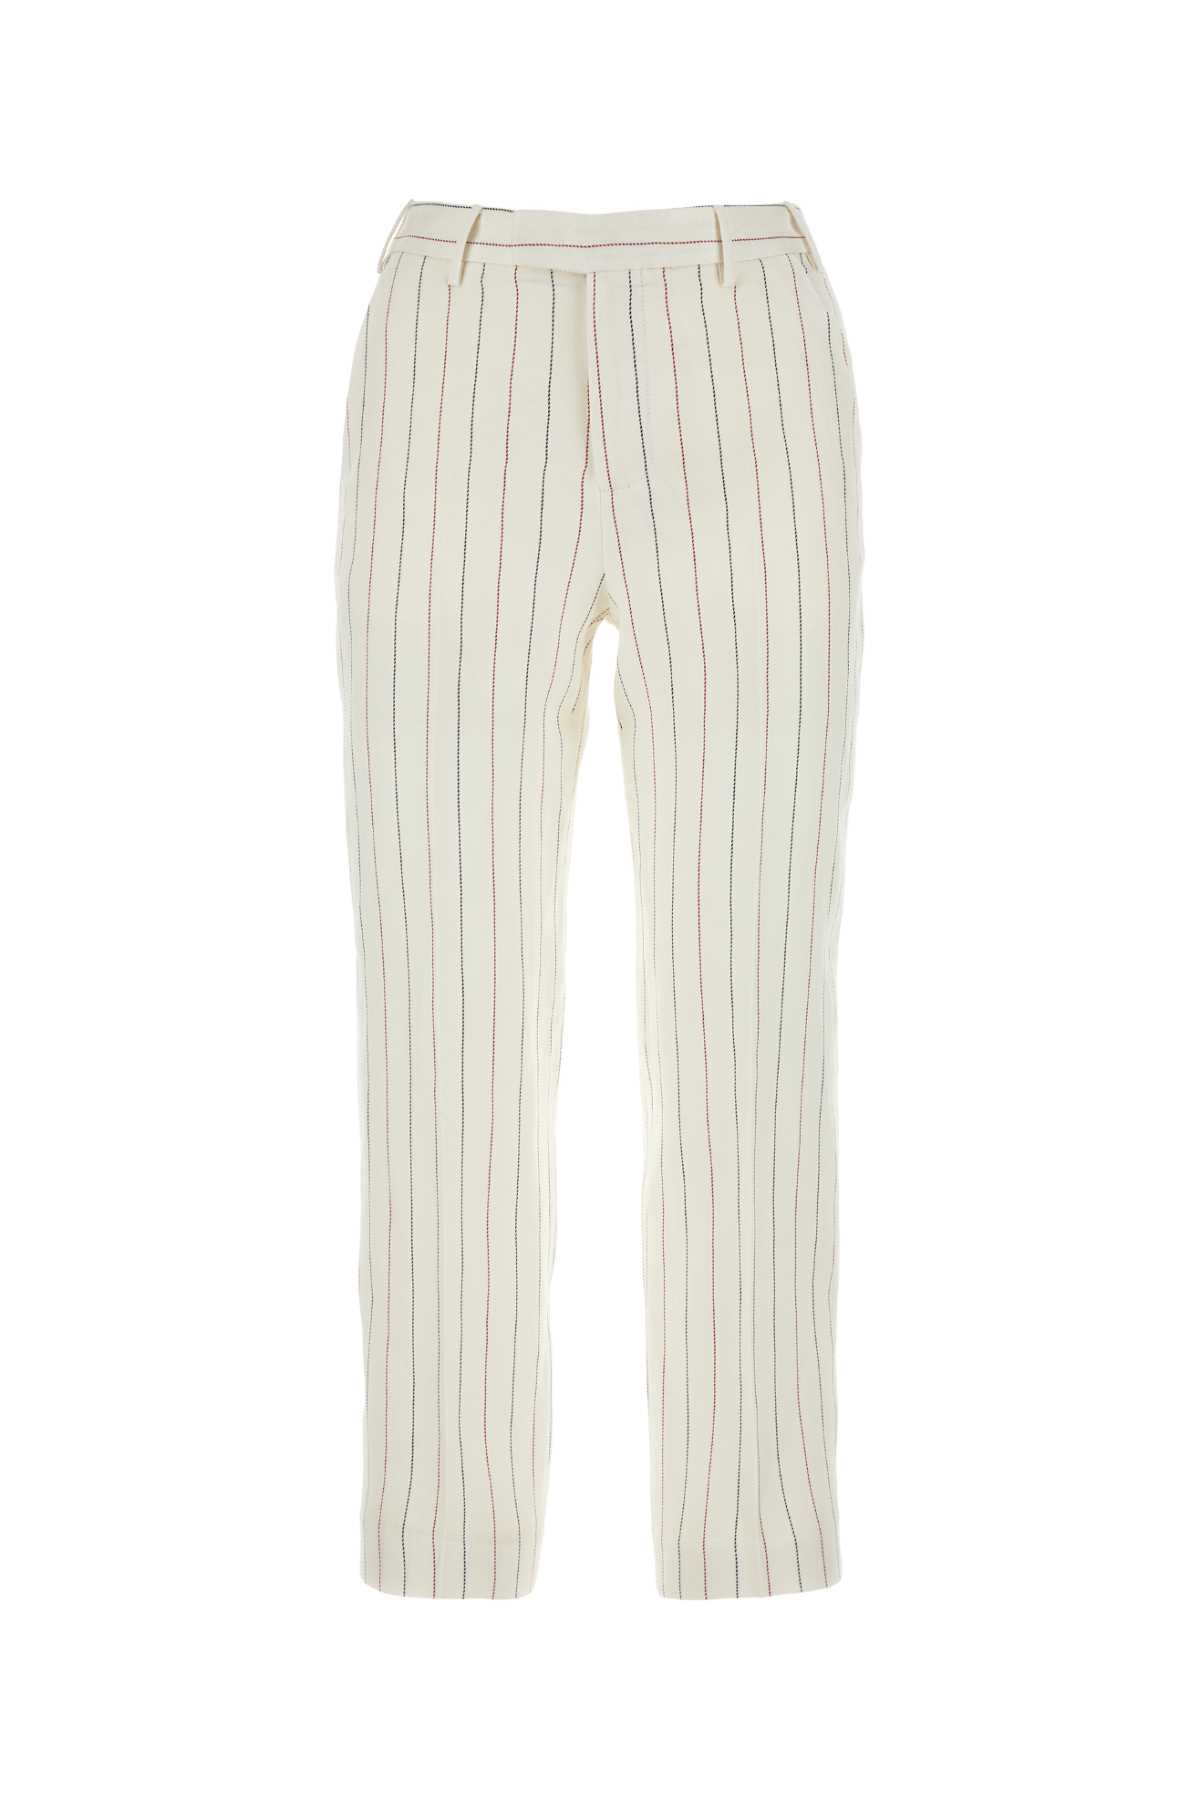 Embroidered Linen Blend Pant